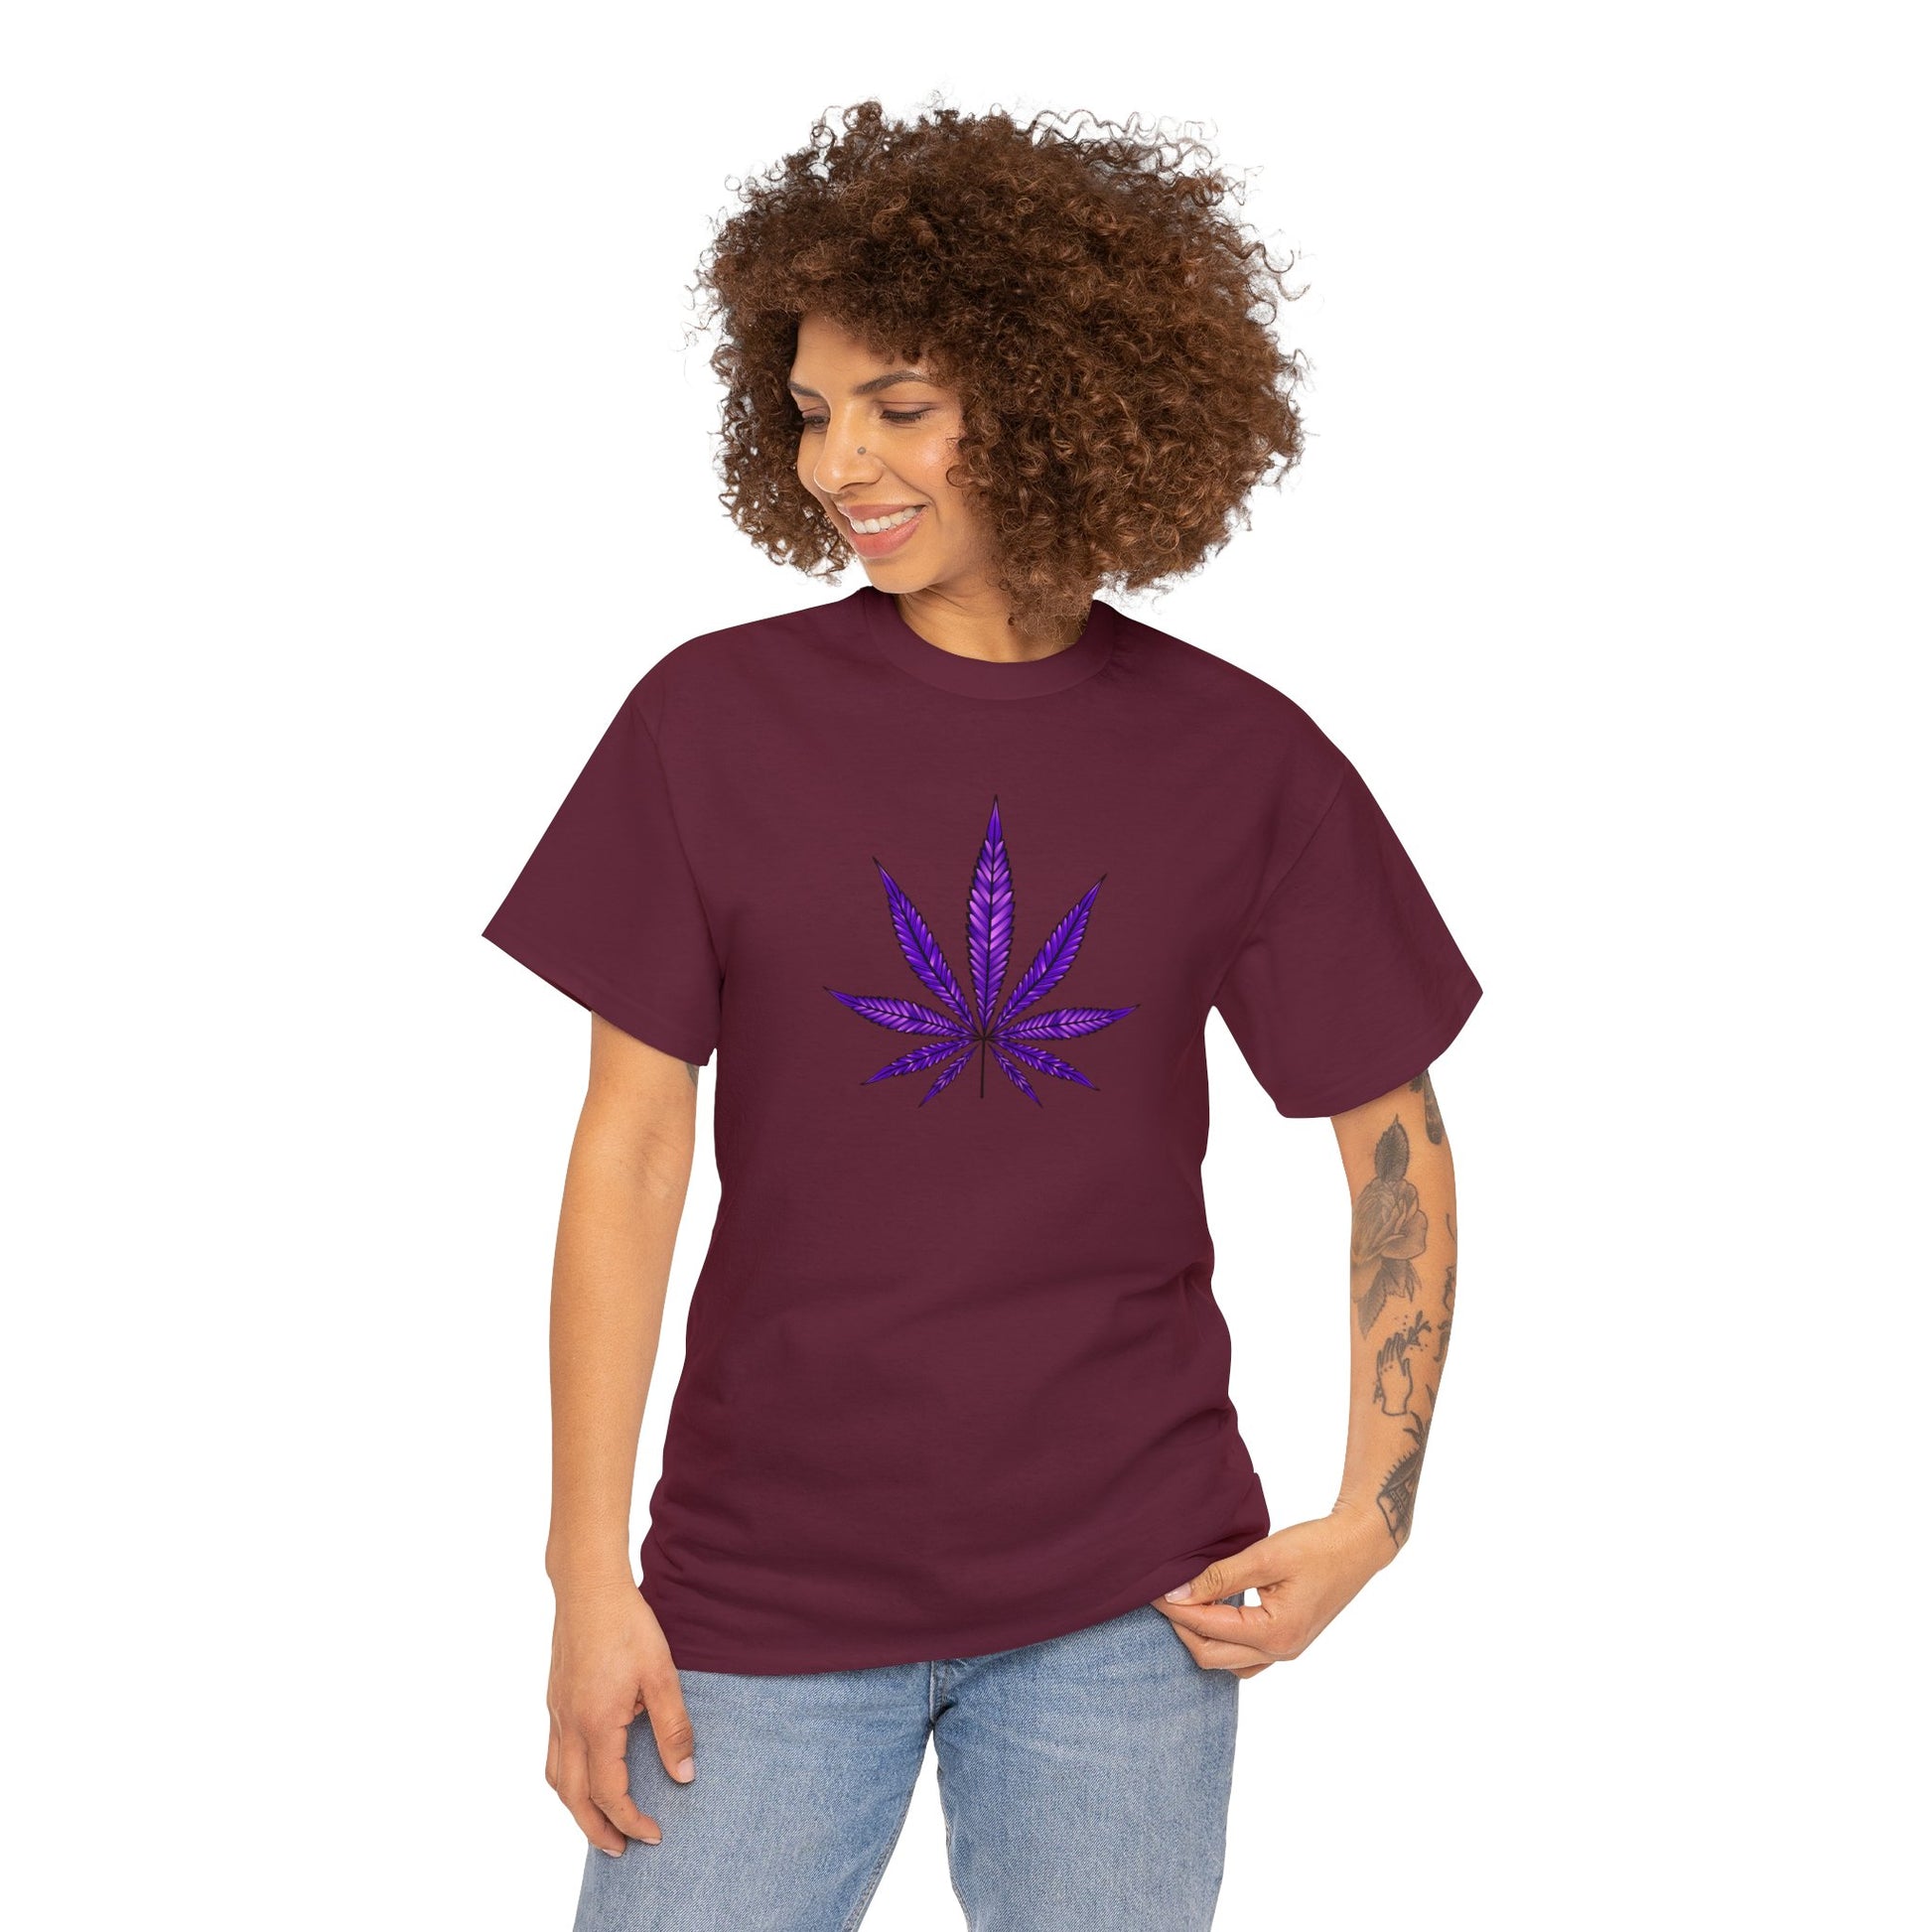 A woman wearing a vibrant color t-shirt with a Purple Cannabis Leaf Tee on the front, representing marijuana culture.